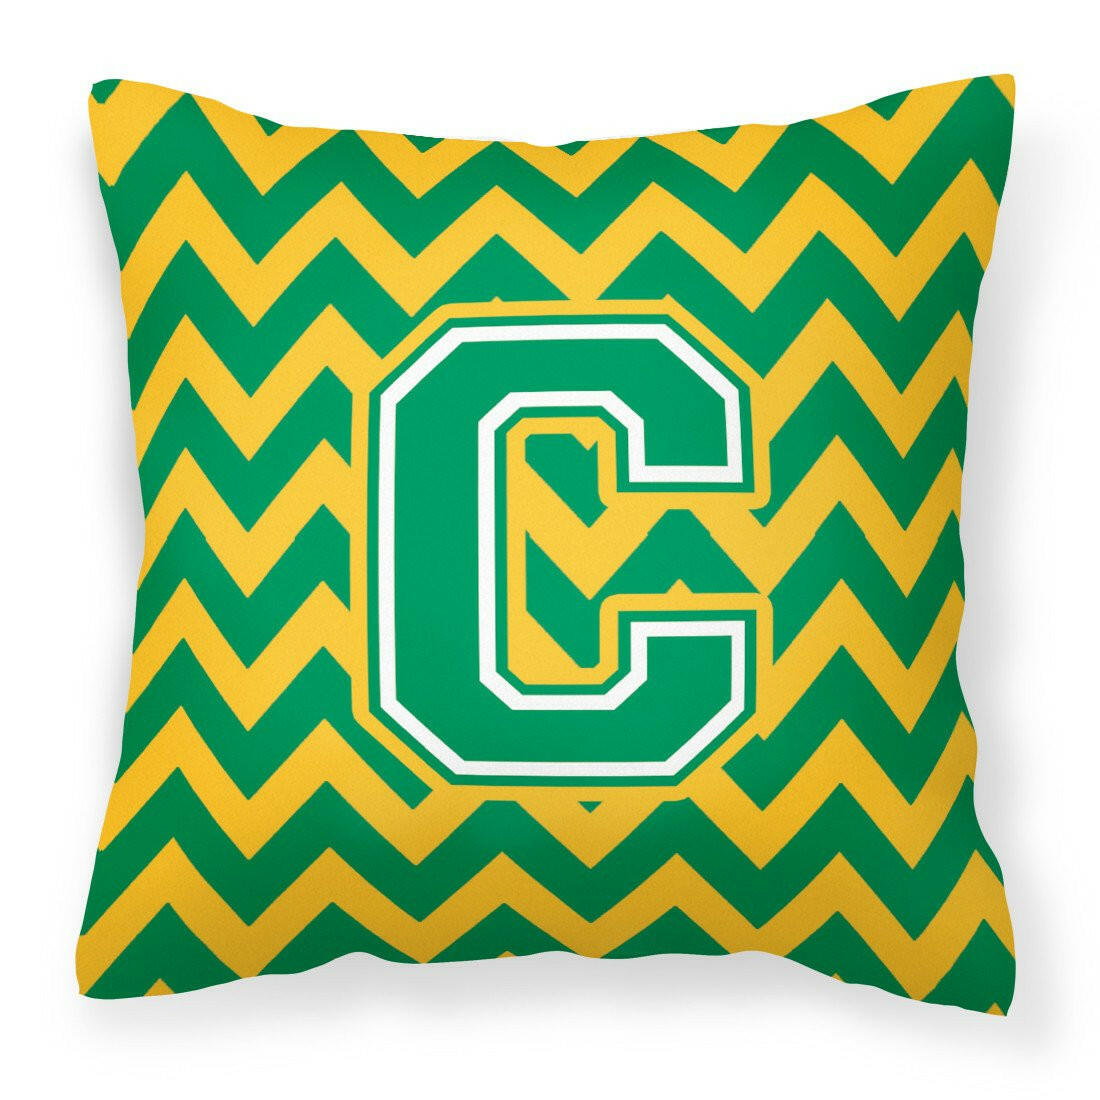 Letter C Chevron Green and Gold Fabric Decorative Pillow CJ1059-CPW1414 by Caroline's Treasures